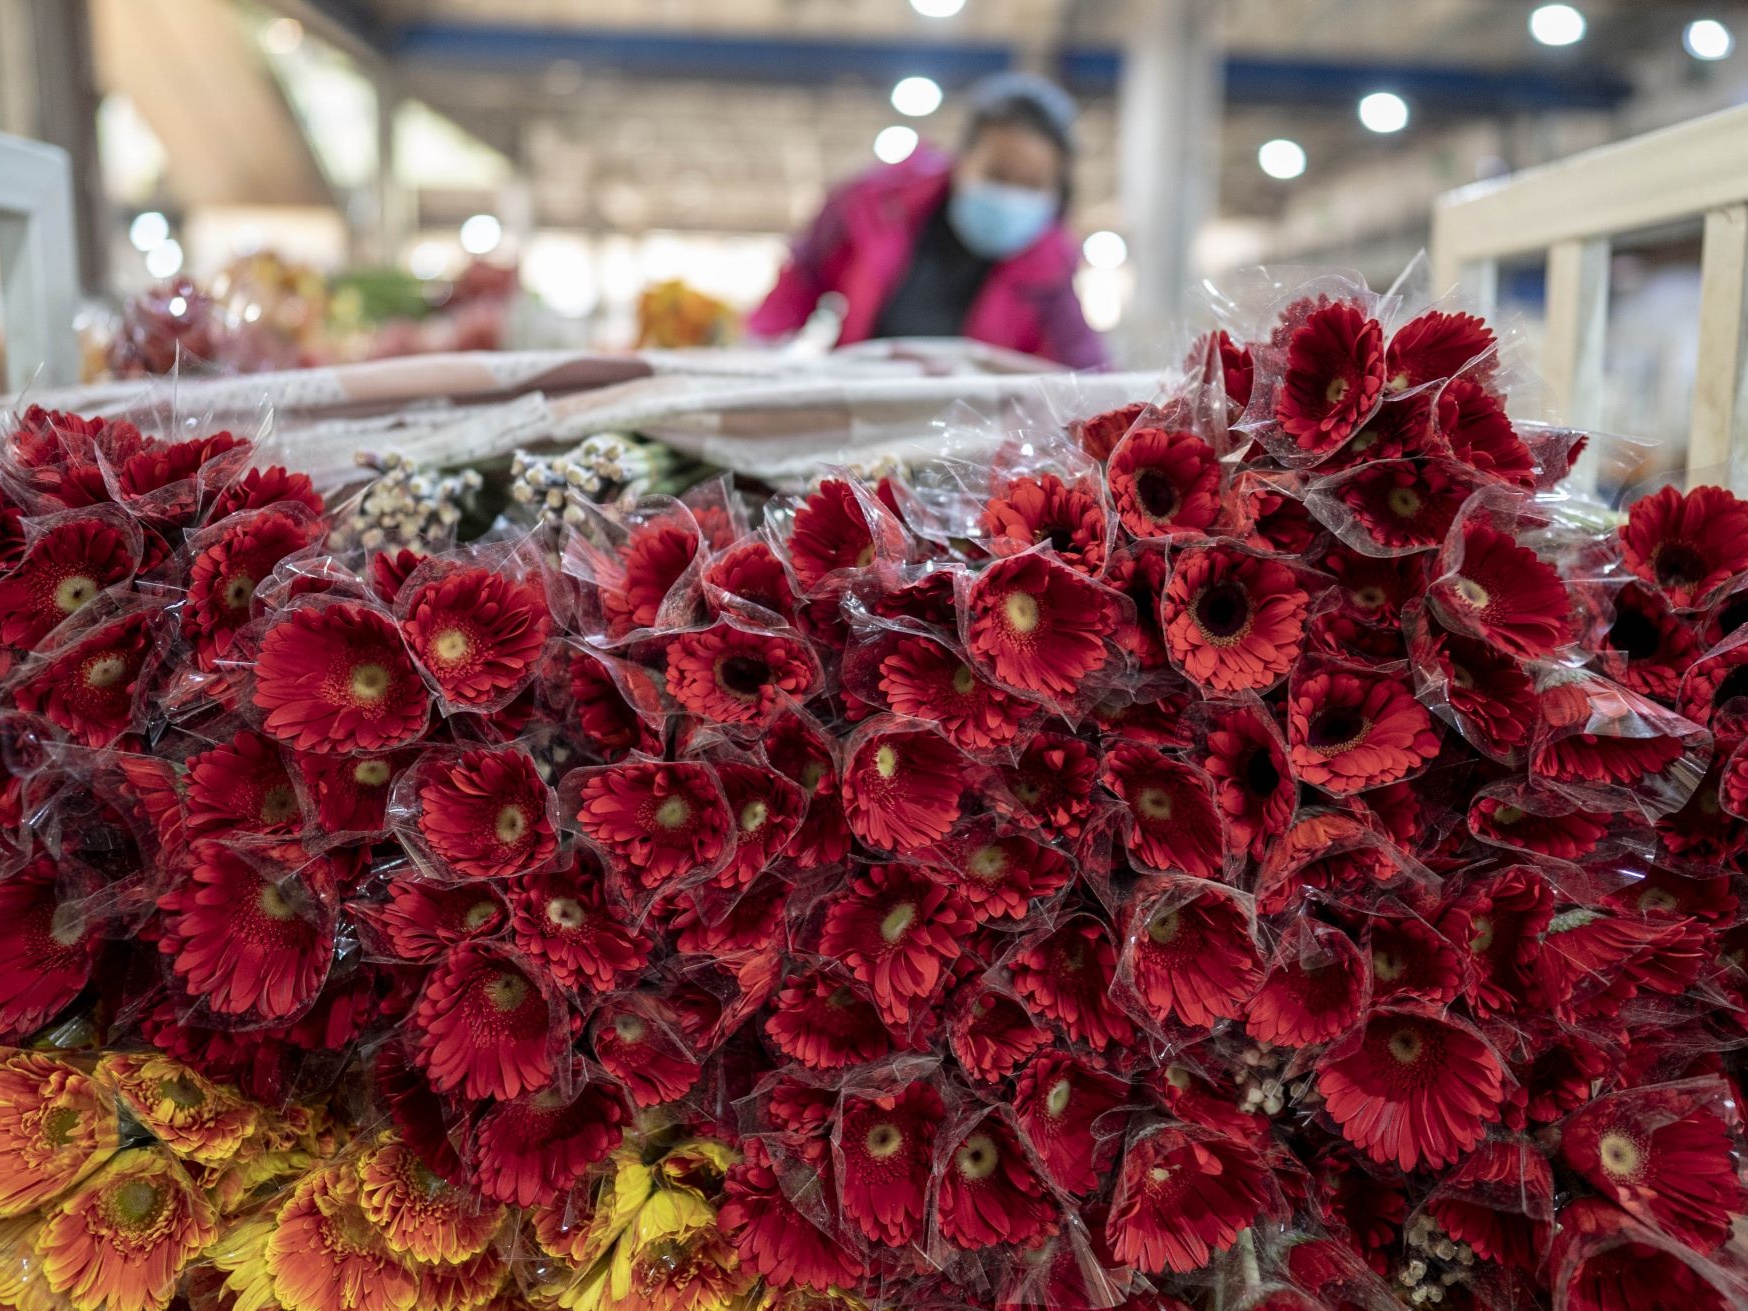 Auctioned transaction at Kunming flower market down 25.2 pct